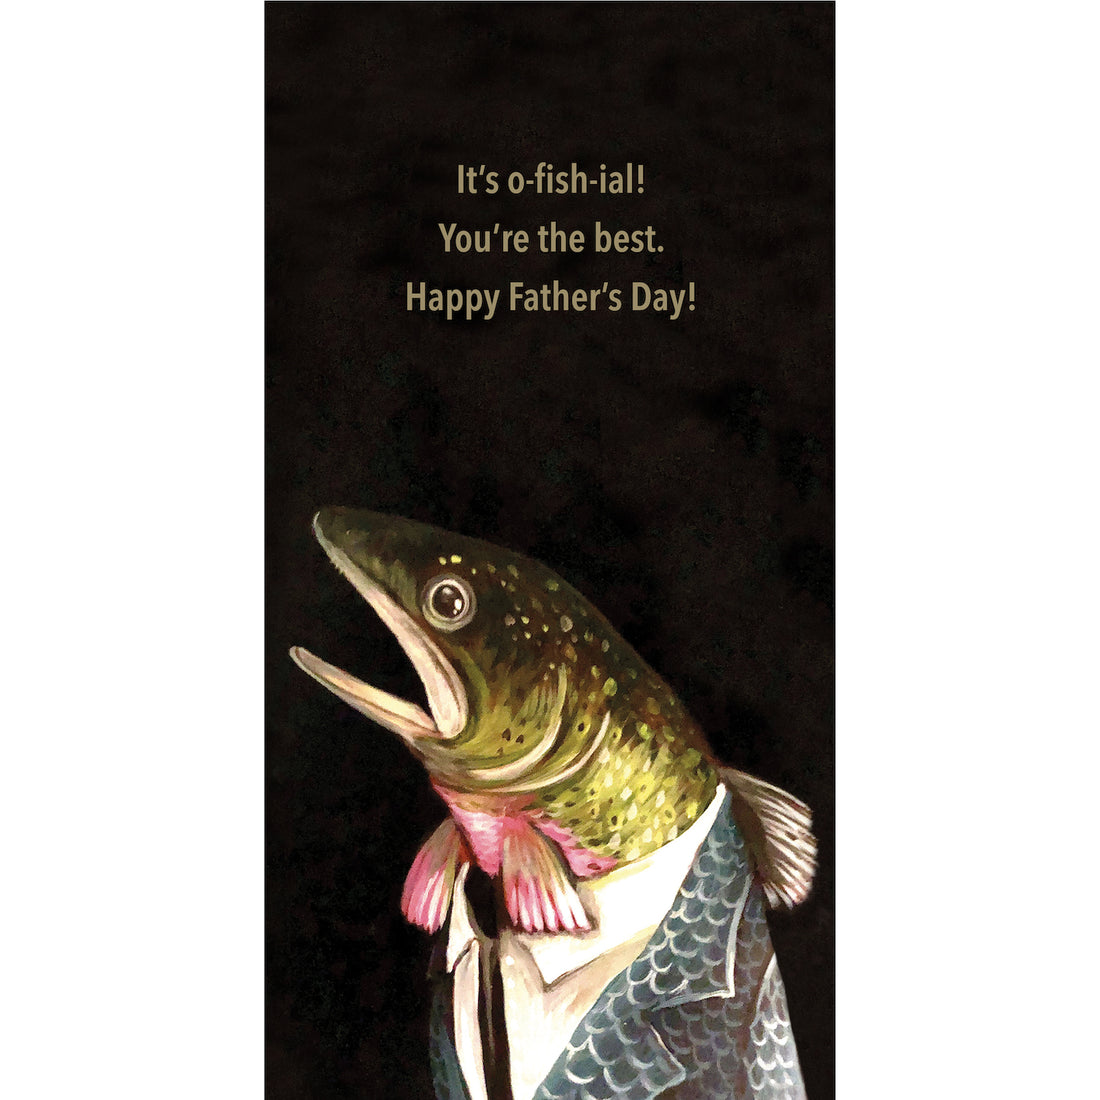 A whimsical illustration of a green and pink fish wearing a suit on a black background, featuring the message &quot;It&